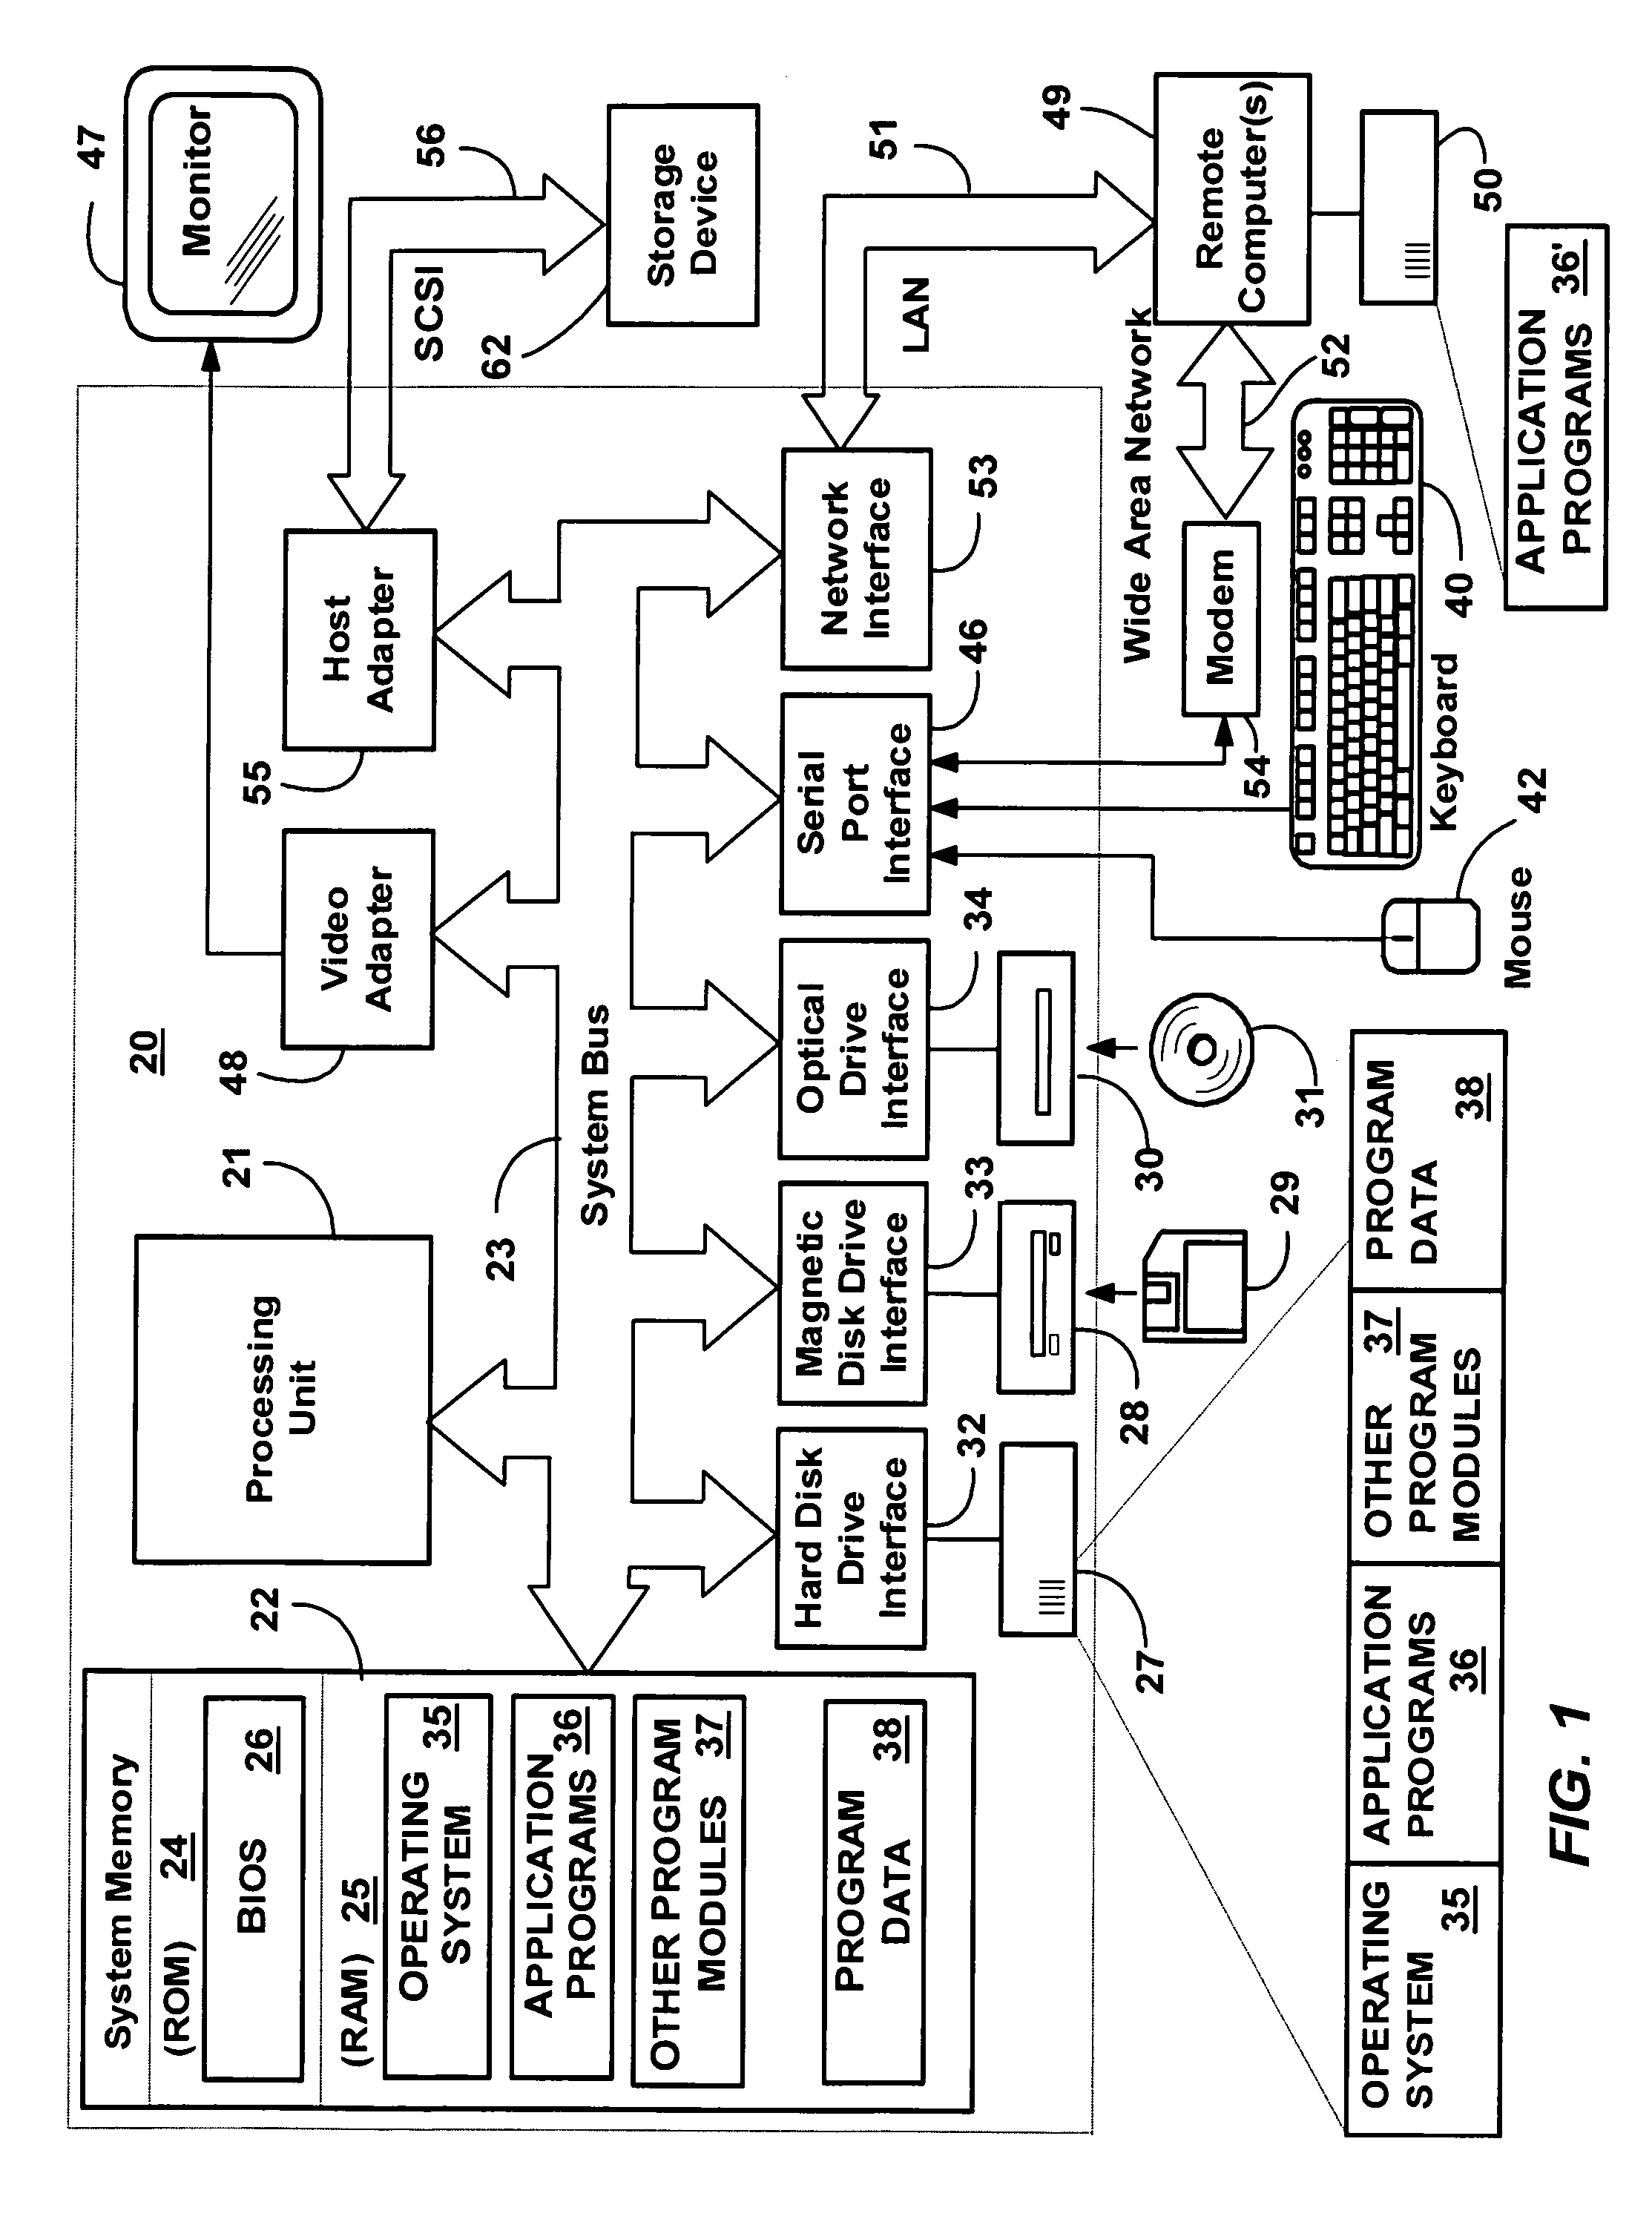 System and method for implementing group policy